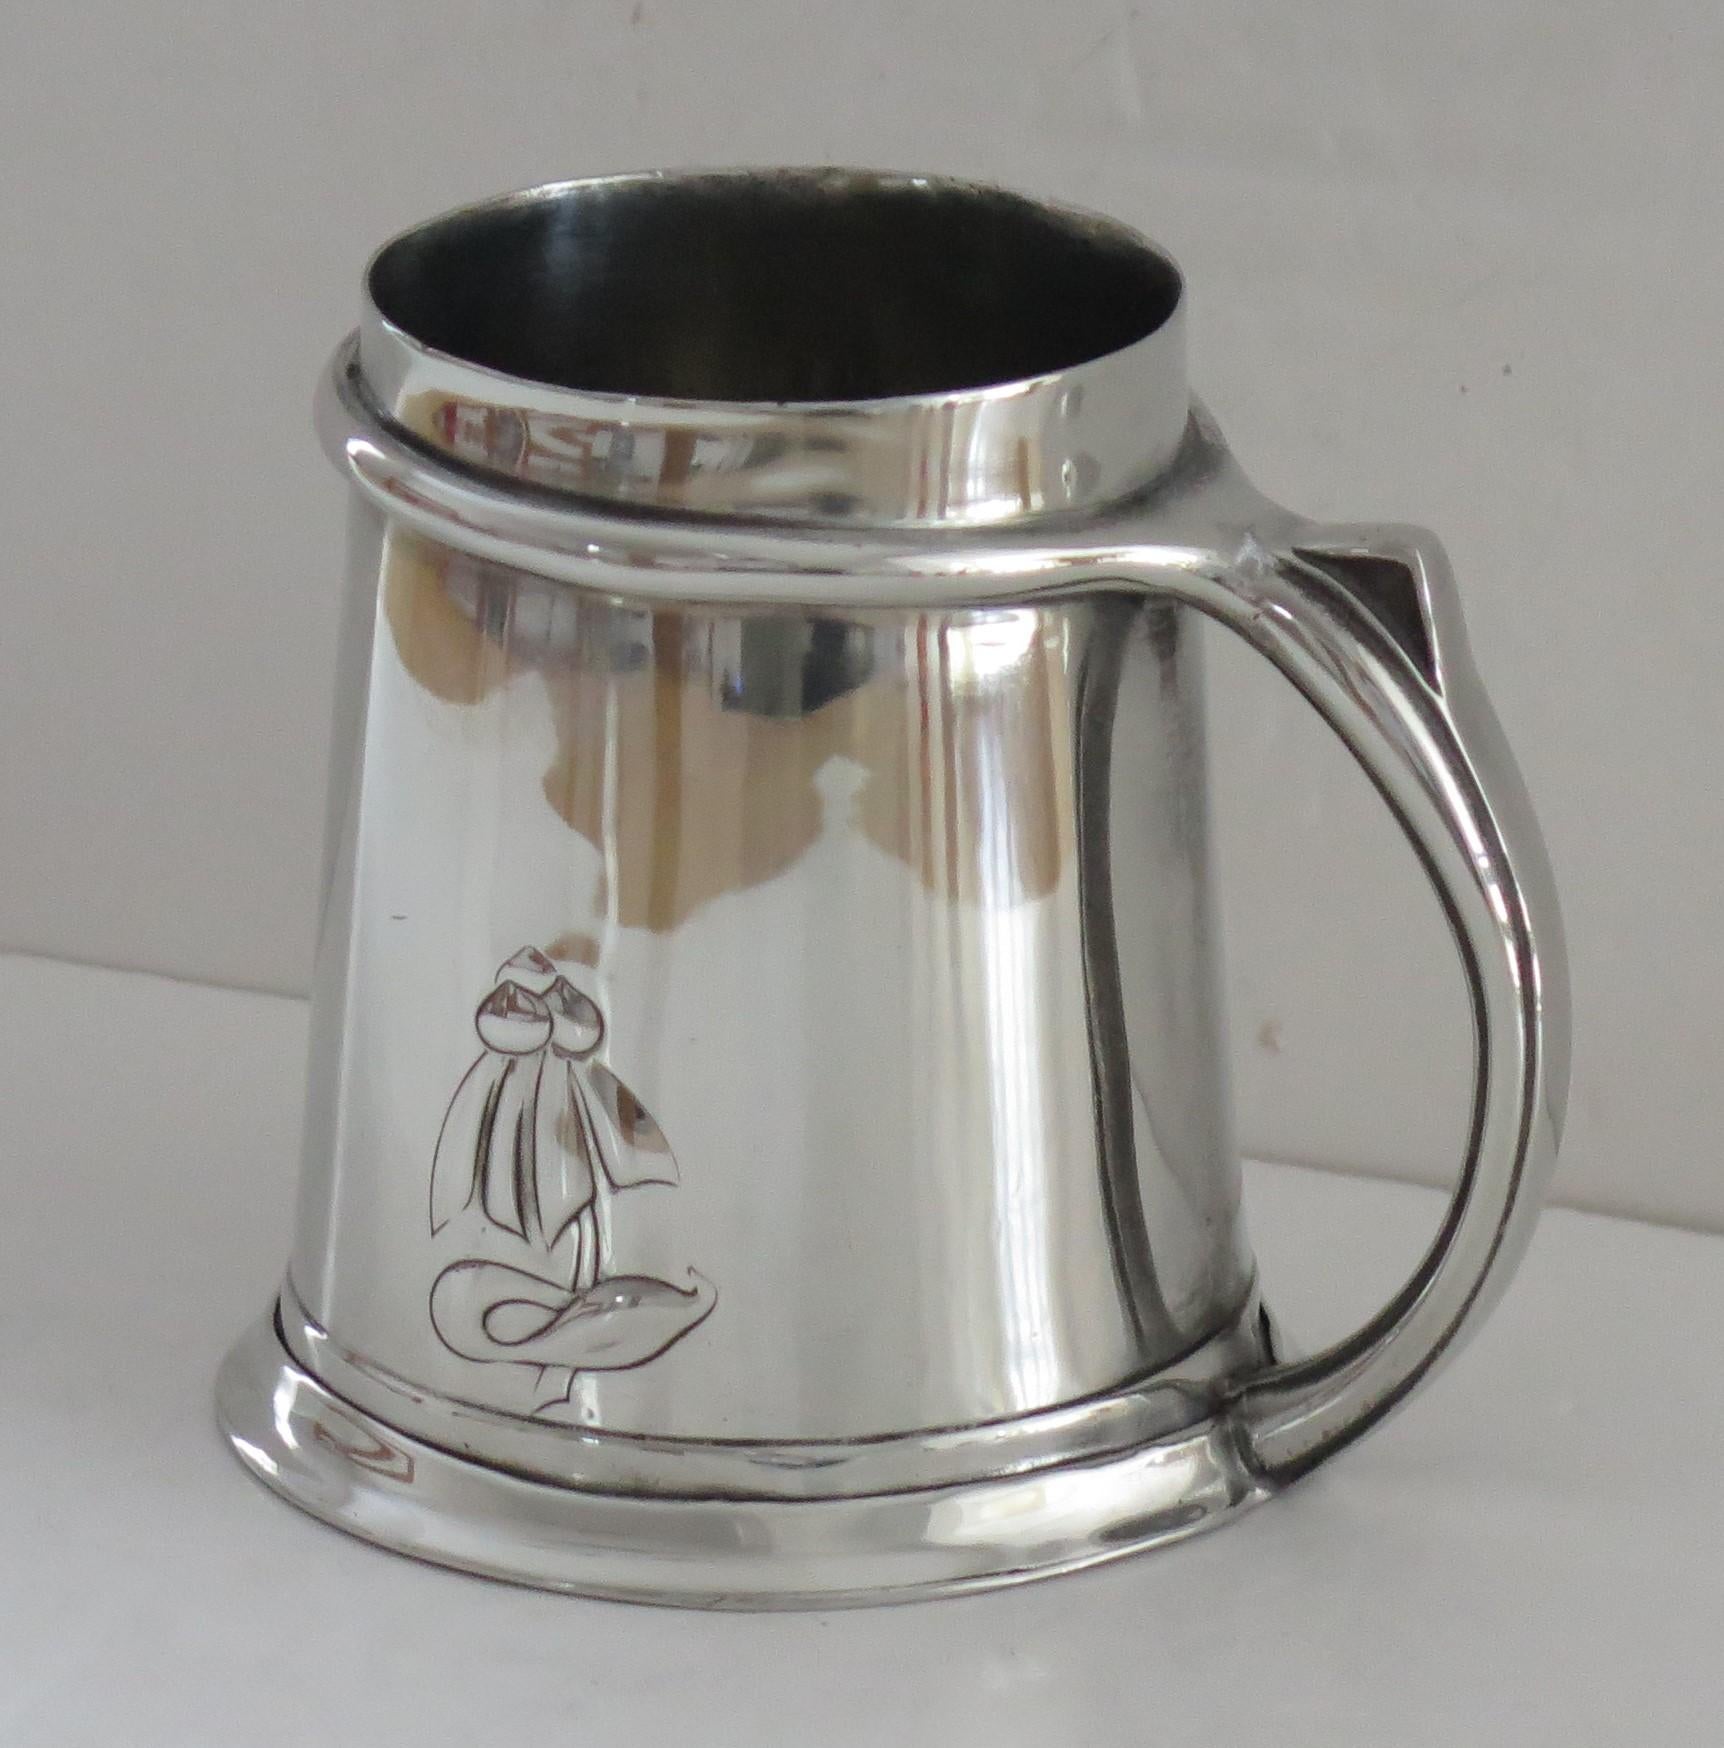 This is a good Pewter Tankard, designed by Archibald Knox, for Liberty & Co and marked Tudric with stamped Number 053, dating to the early 20th century, circa 1902.

The tankard is made of Pewter and has a polished and tapered hammered body with a